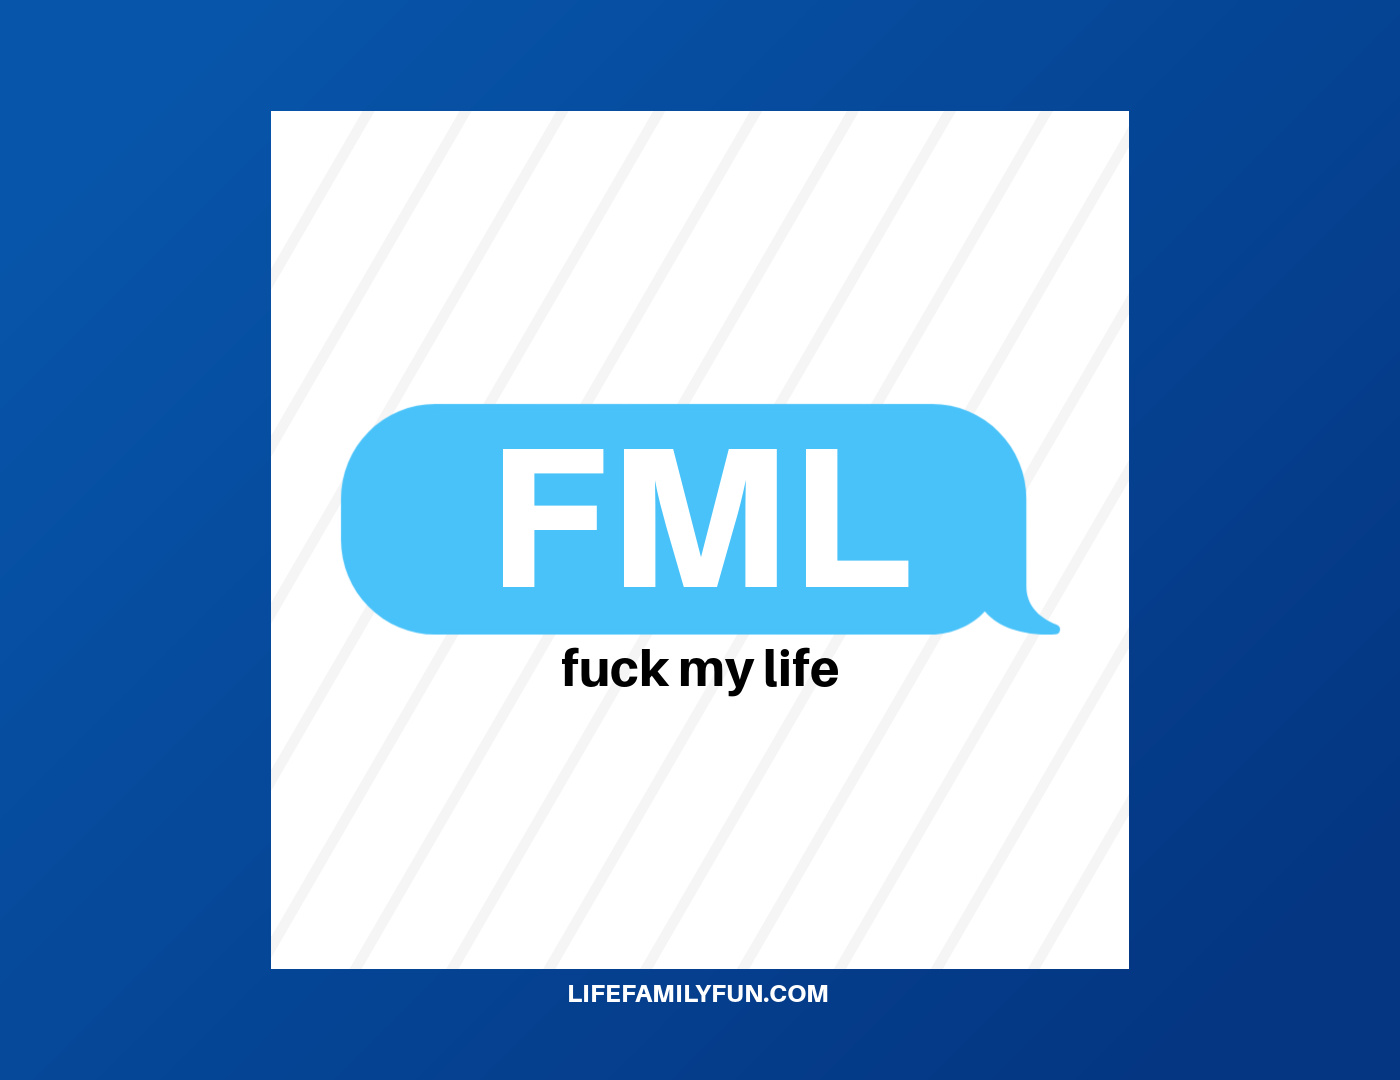 What does FML mean?